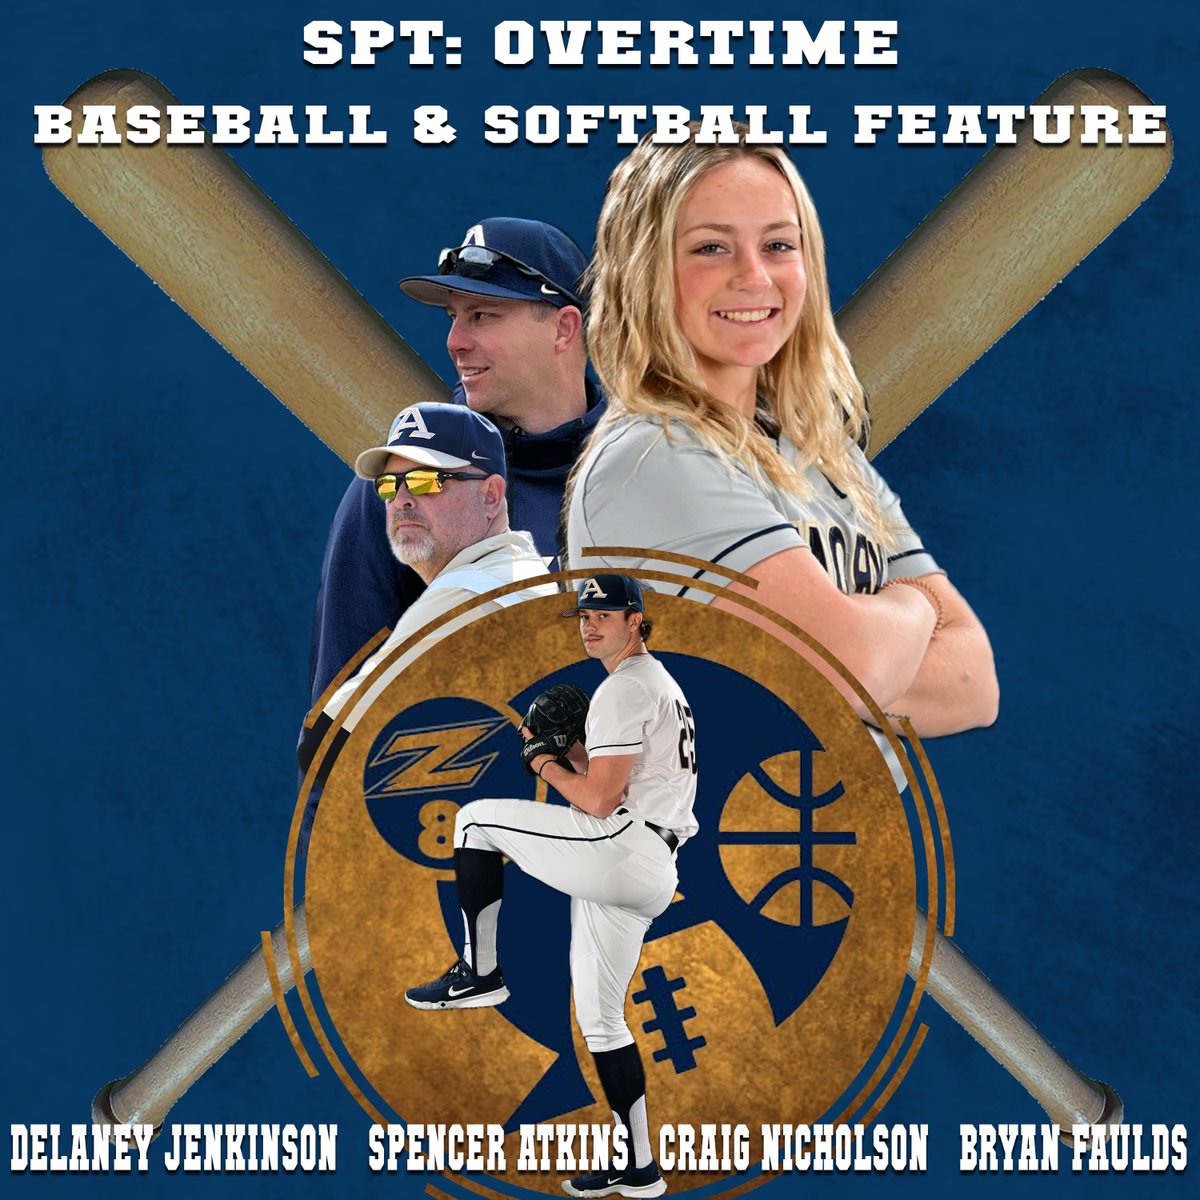 WZIP Sports is proud to present... 'The Akron Zips Baseball and Softball Feature!' This package is stacked with interviews from Craig Nicholson and Delaney Jenkinson of @ZipsSB followed by Spencer Atkins and Bryan Faulds of @ZipsBB Check it out! share.transistor.fm/s/5e42bac0